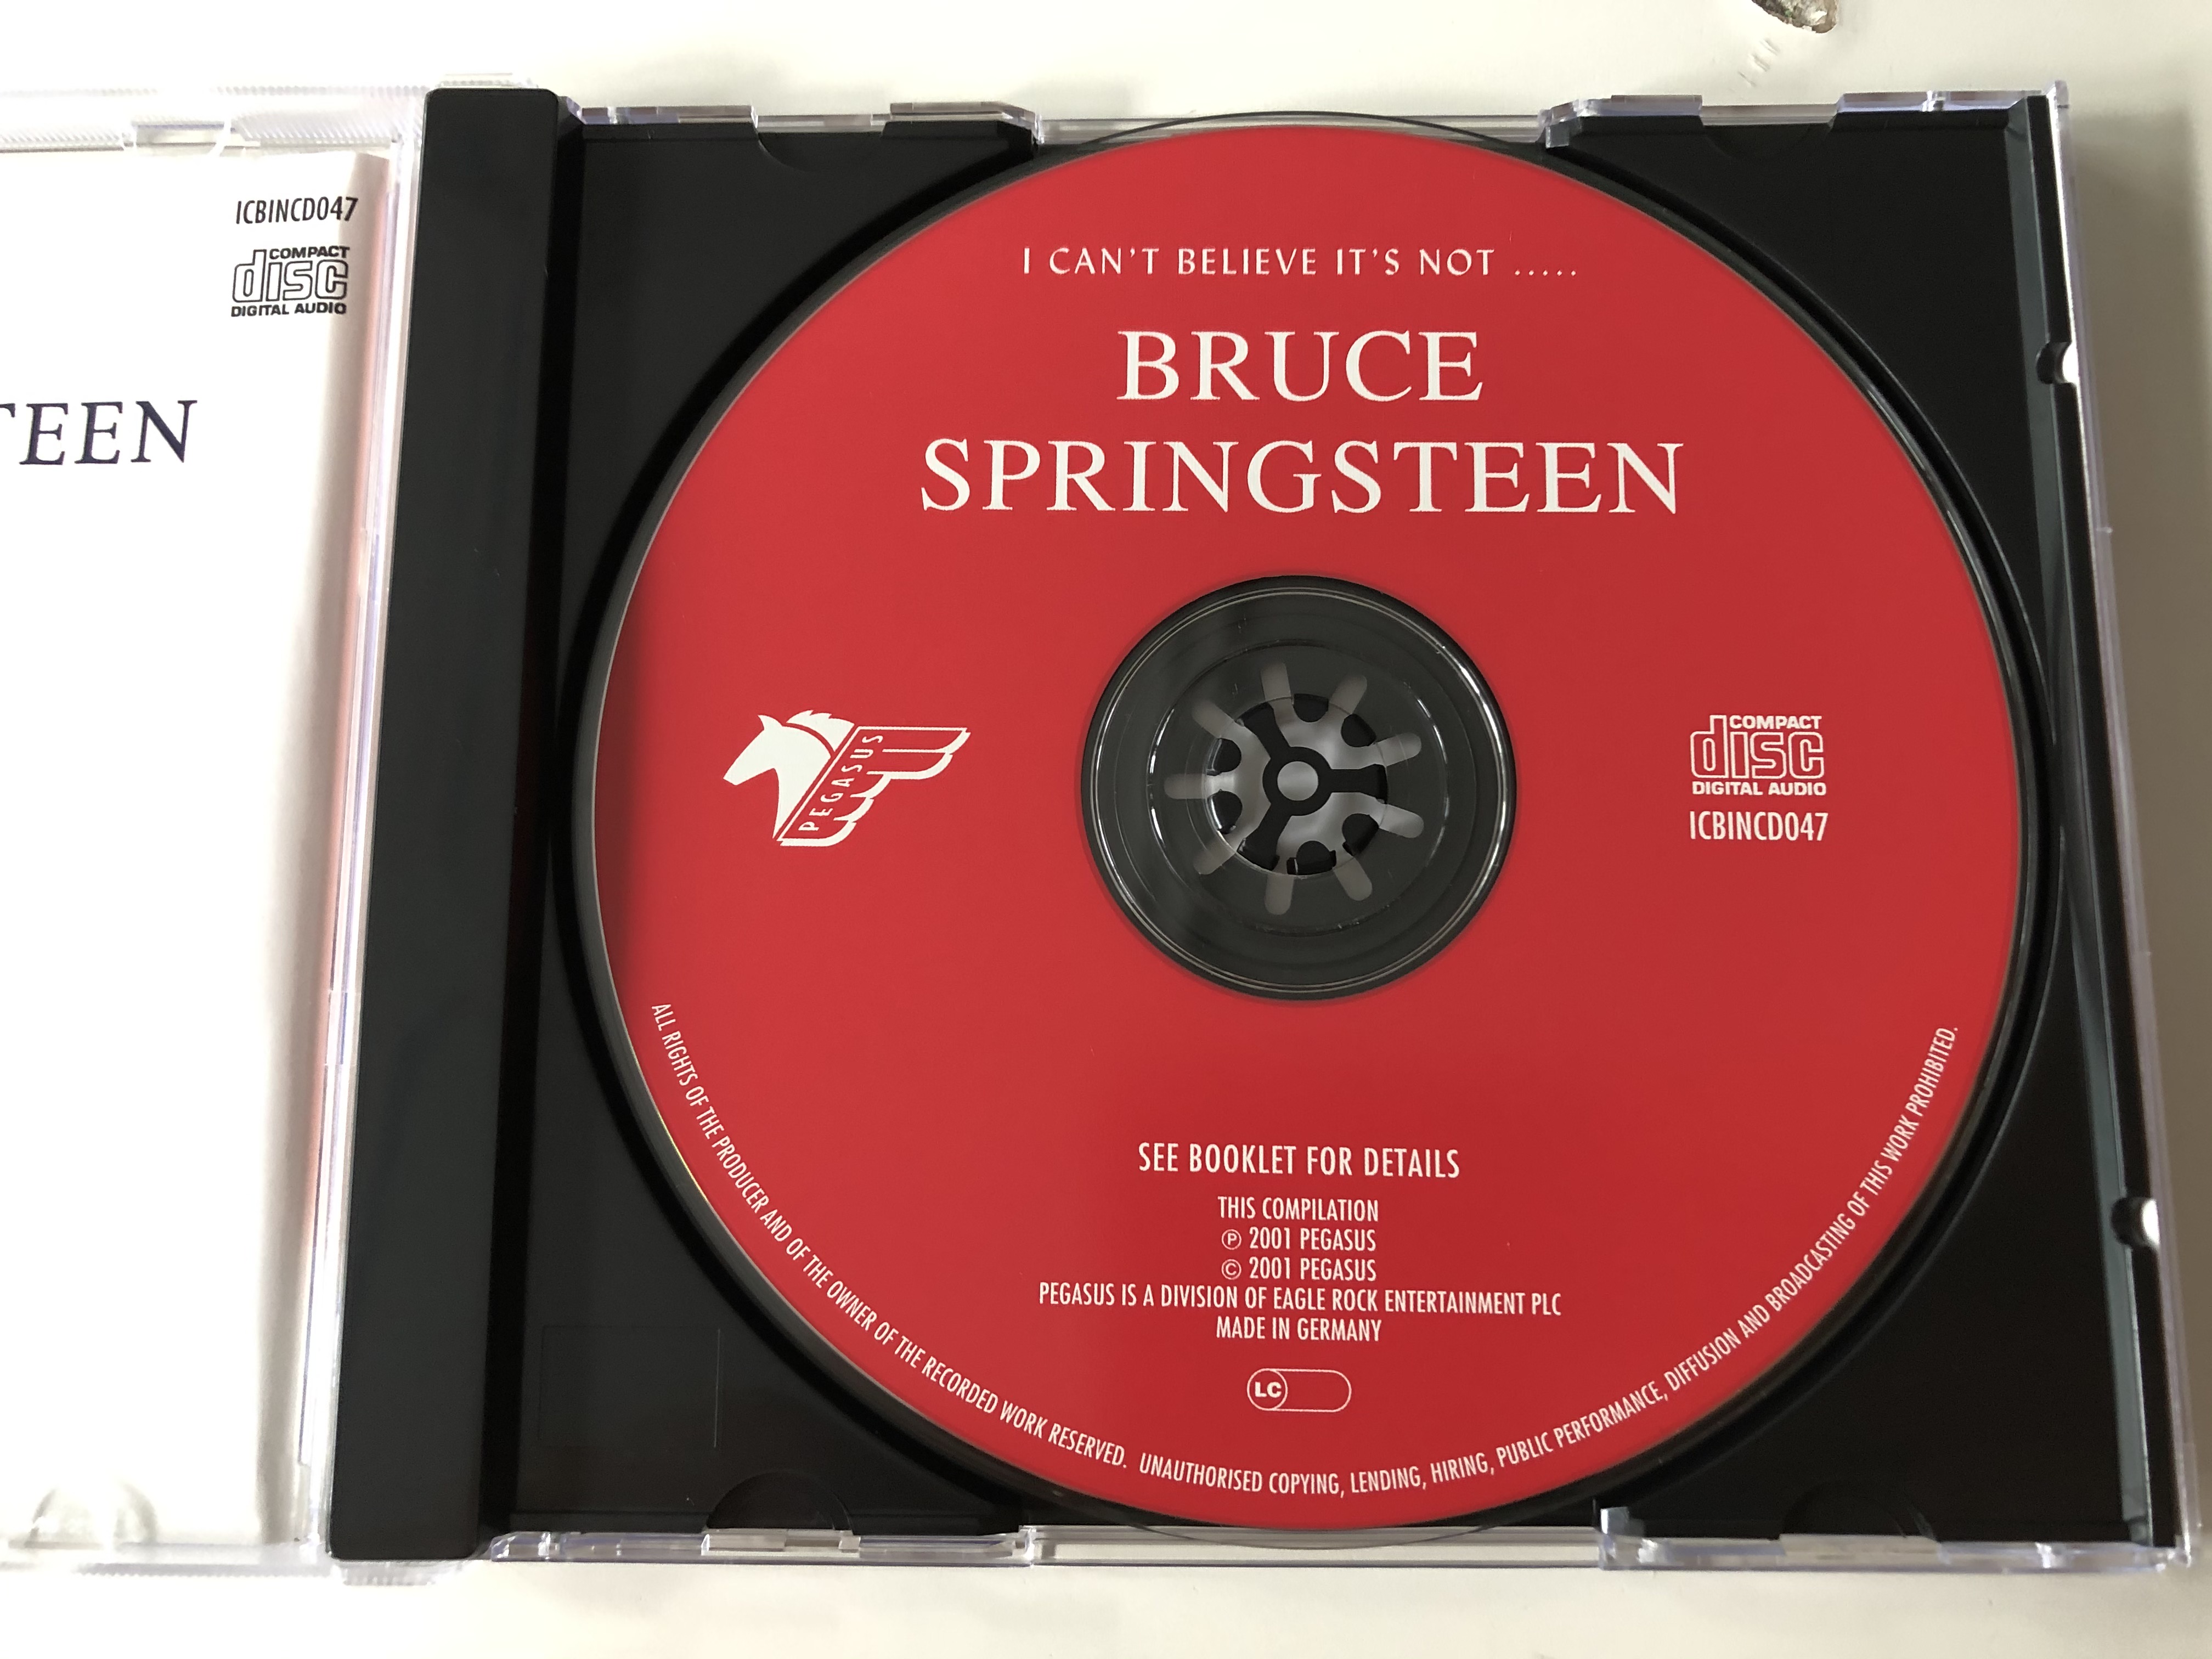 bruce-springsteen-i-can-t-believe-it-s-not...-born-in-the-usa-tracks-performed-by-richard-coleman-include-born-in-the-usa-glory-days-streets-of-philadelphia-pegasus-audio-cd-2001-icbi-5-.jpg